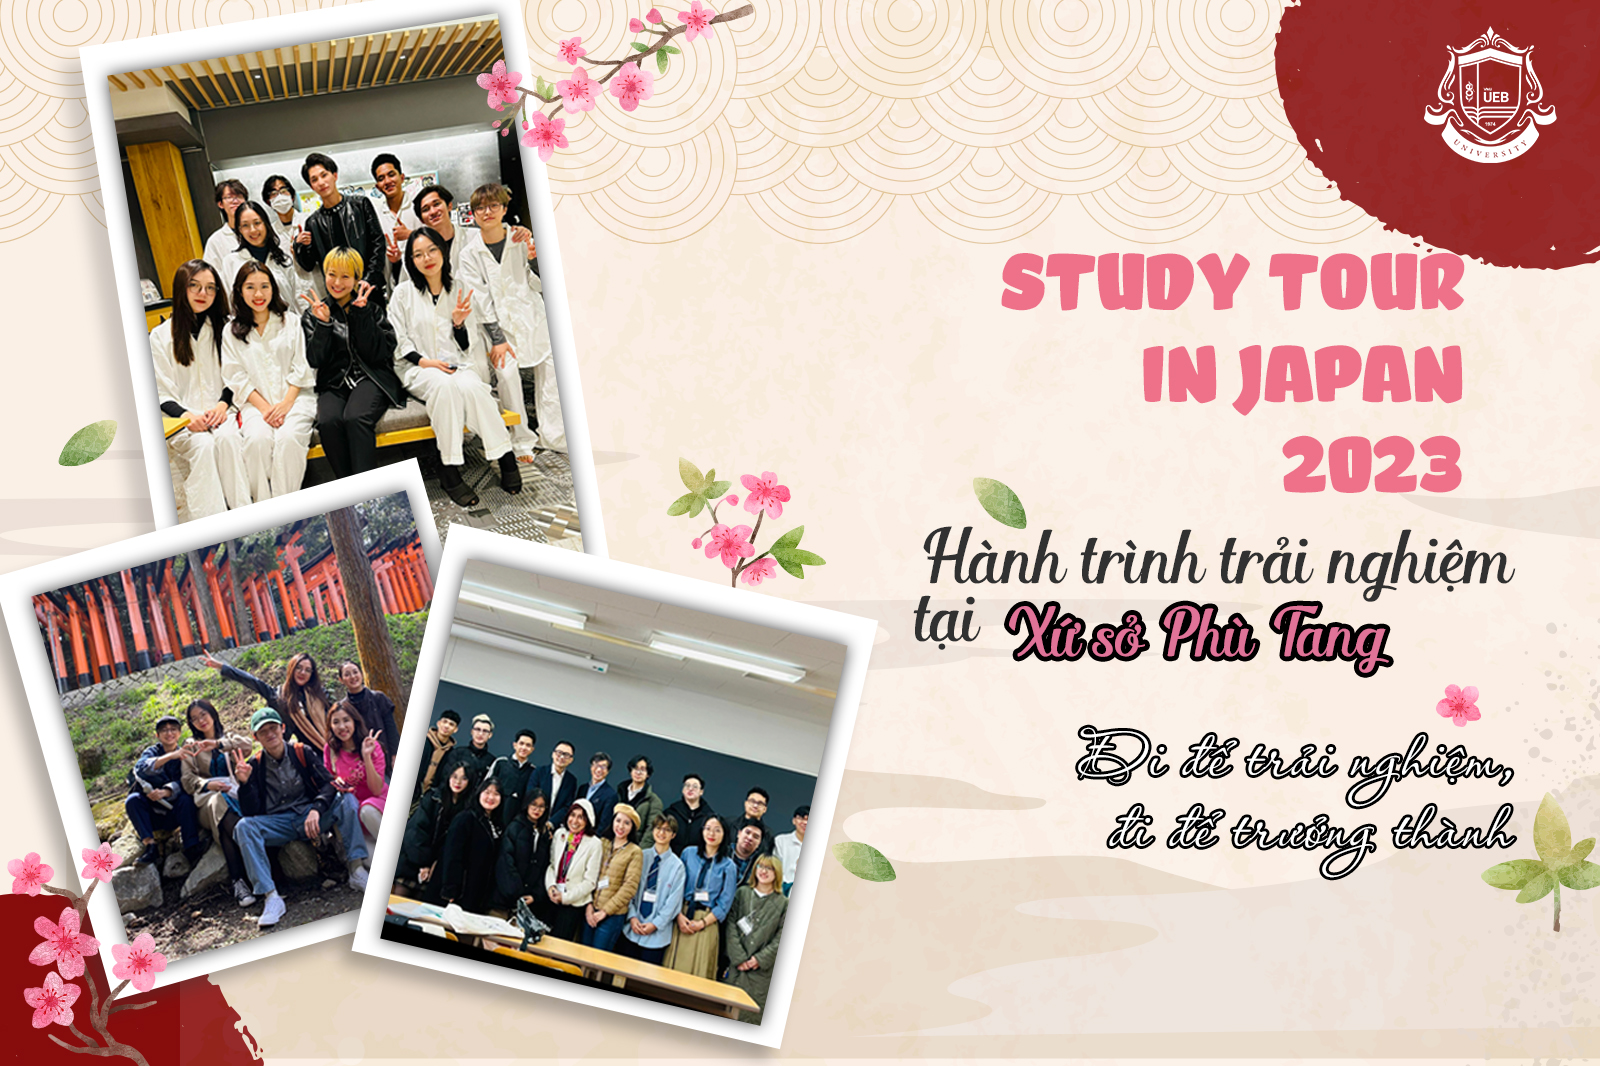 Study Tour Japan 2023 - How did UEBers learn from this exciting experience?